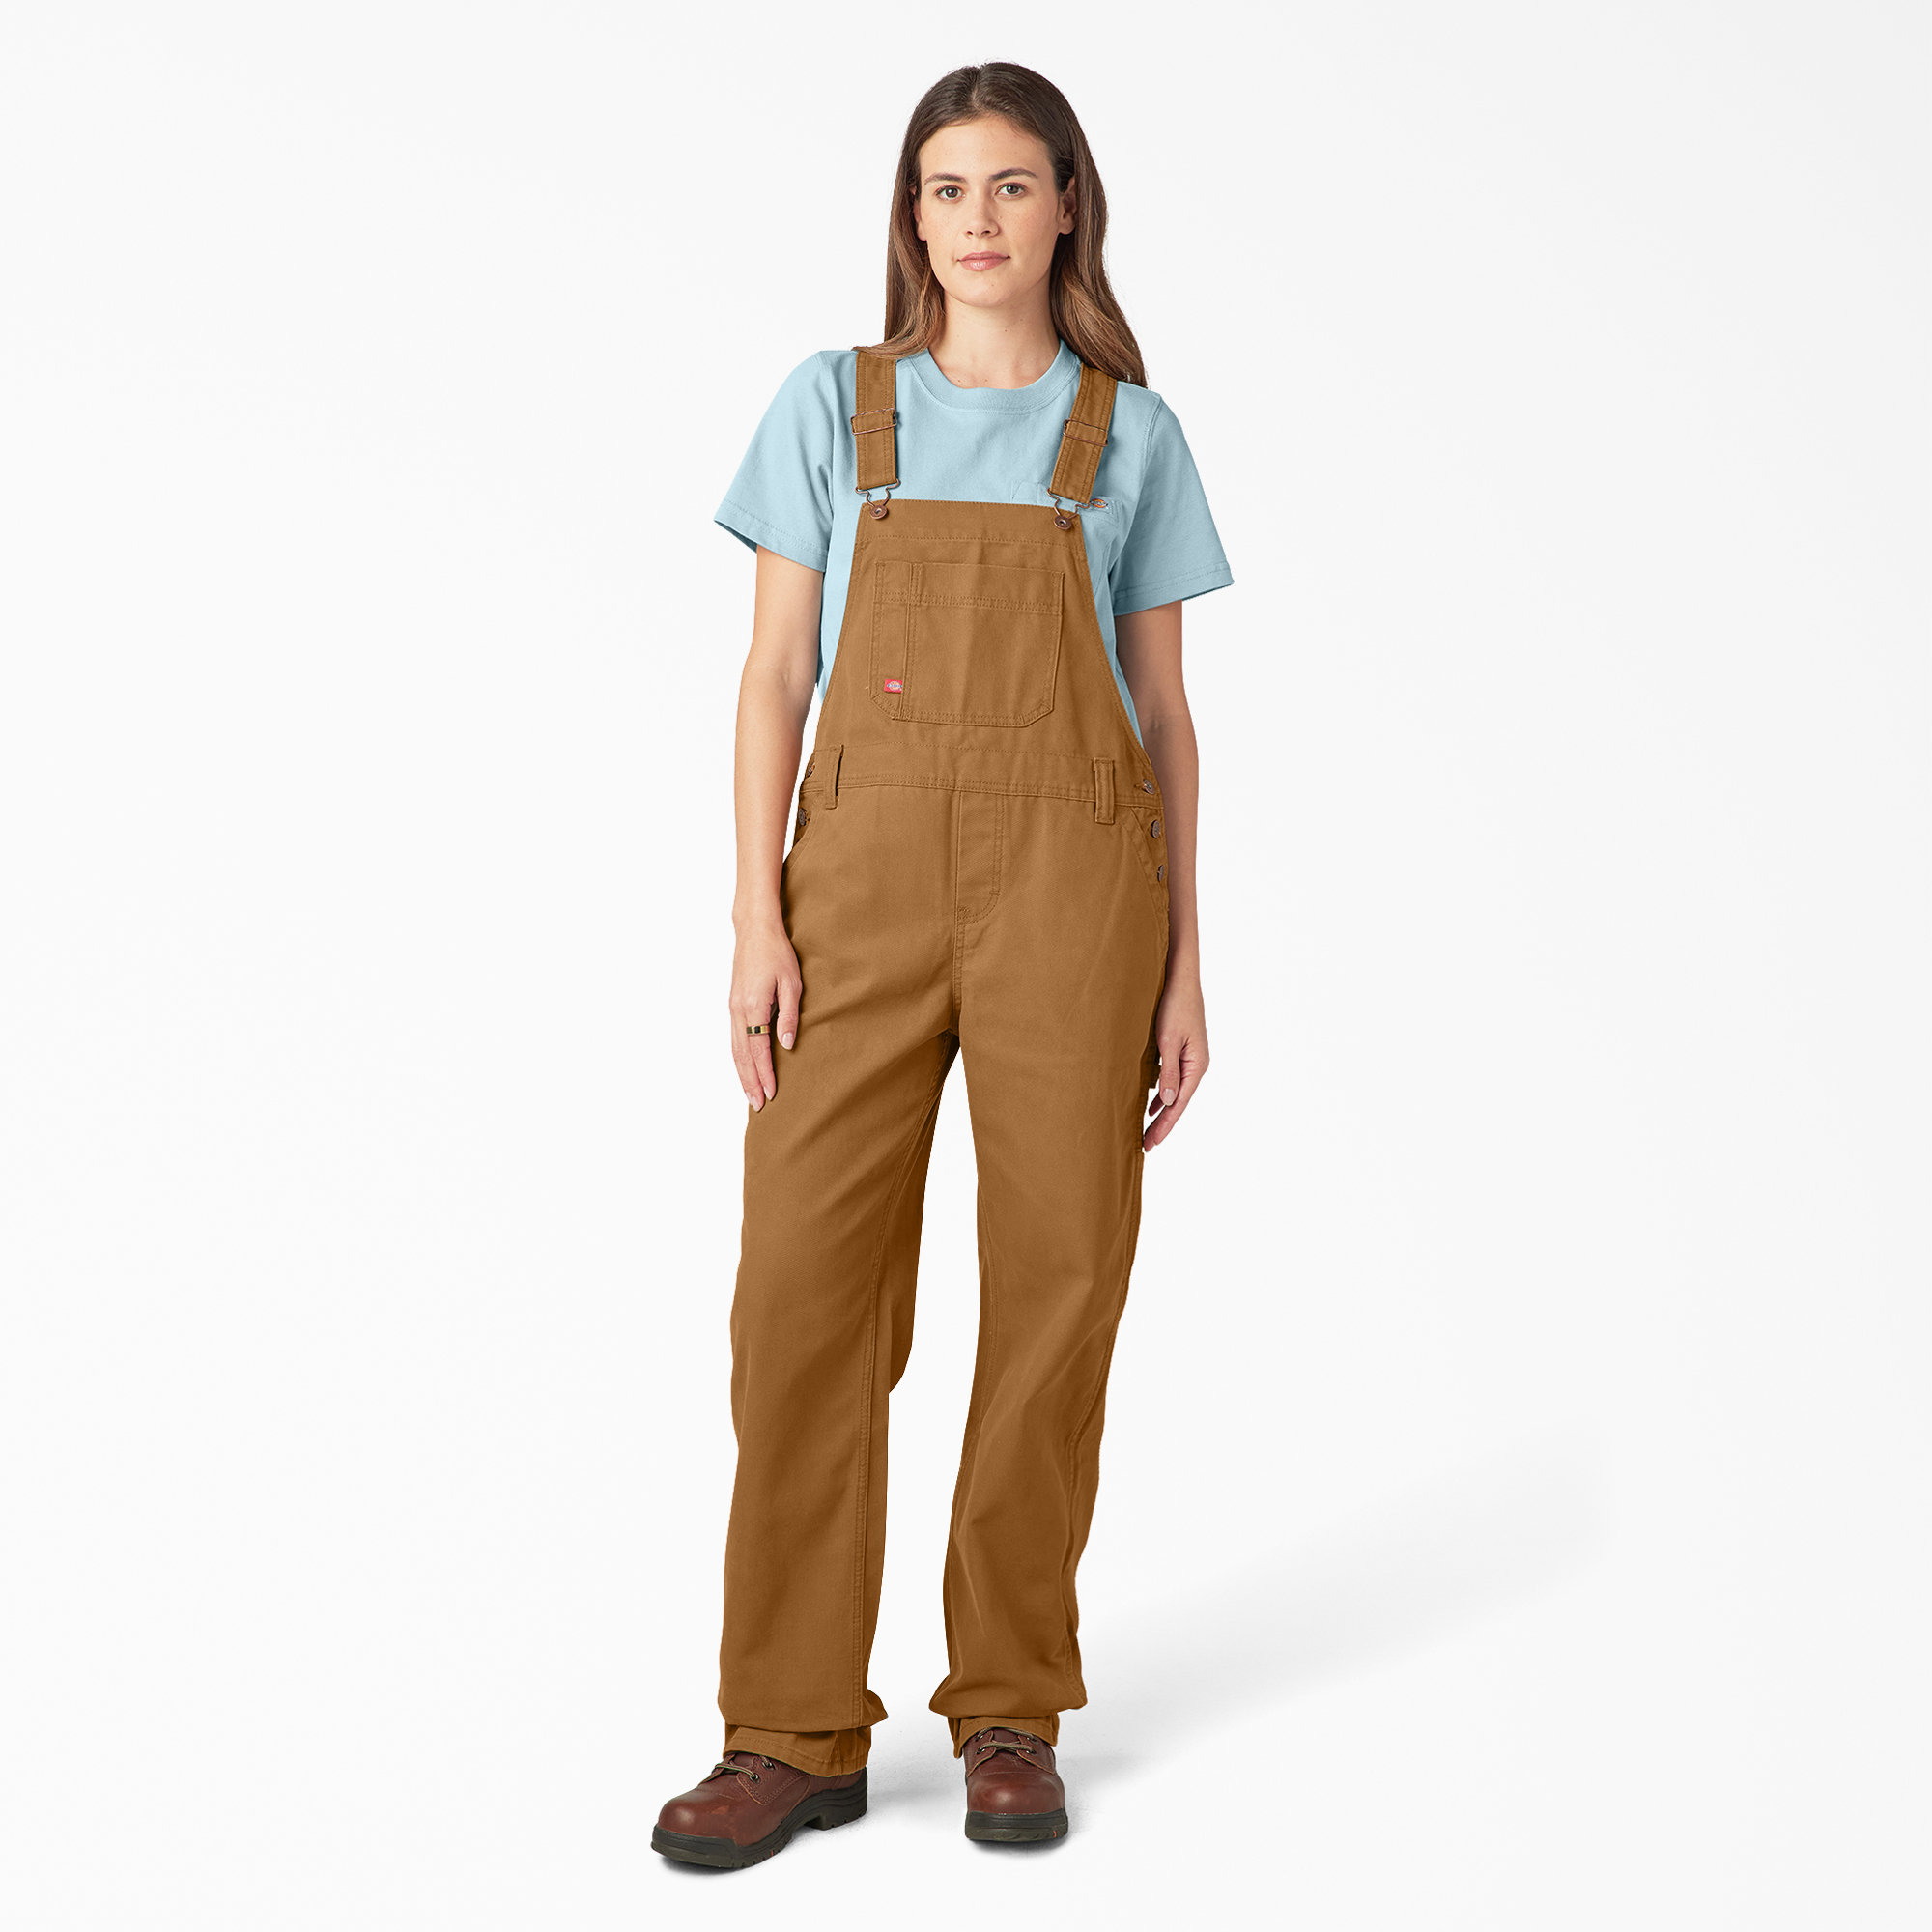 Women's Relaxed Fit Bib Overalls - Brown Duck (RBD)